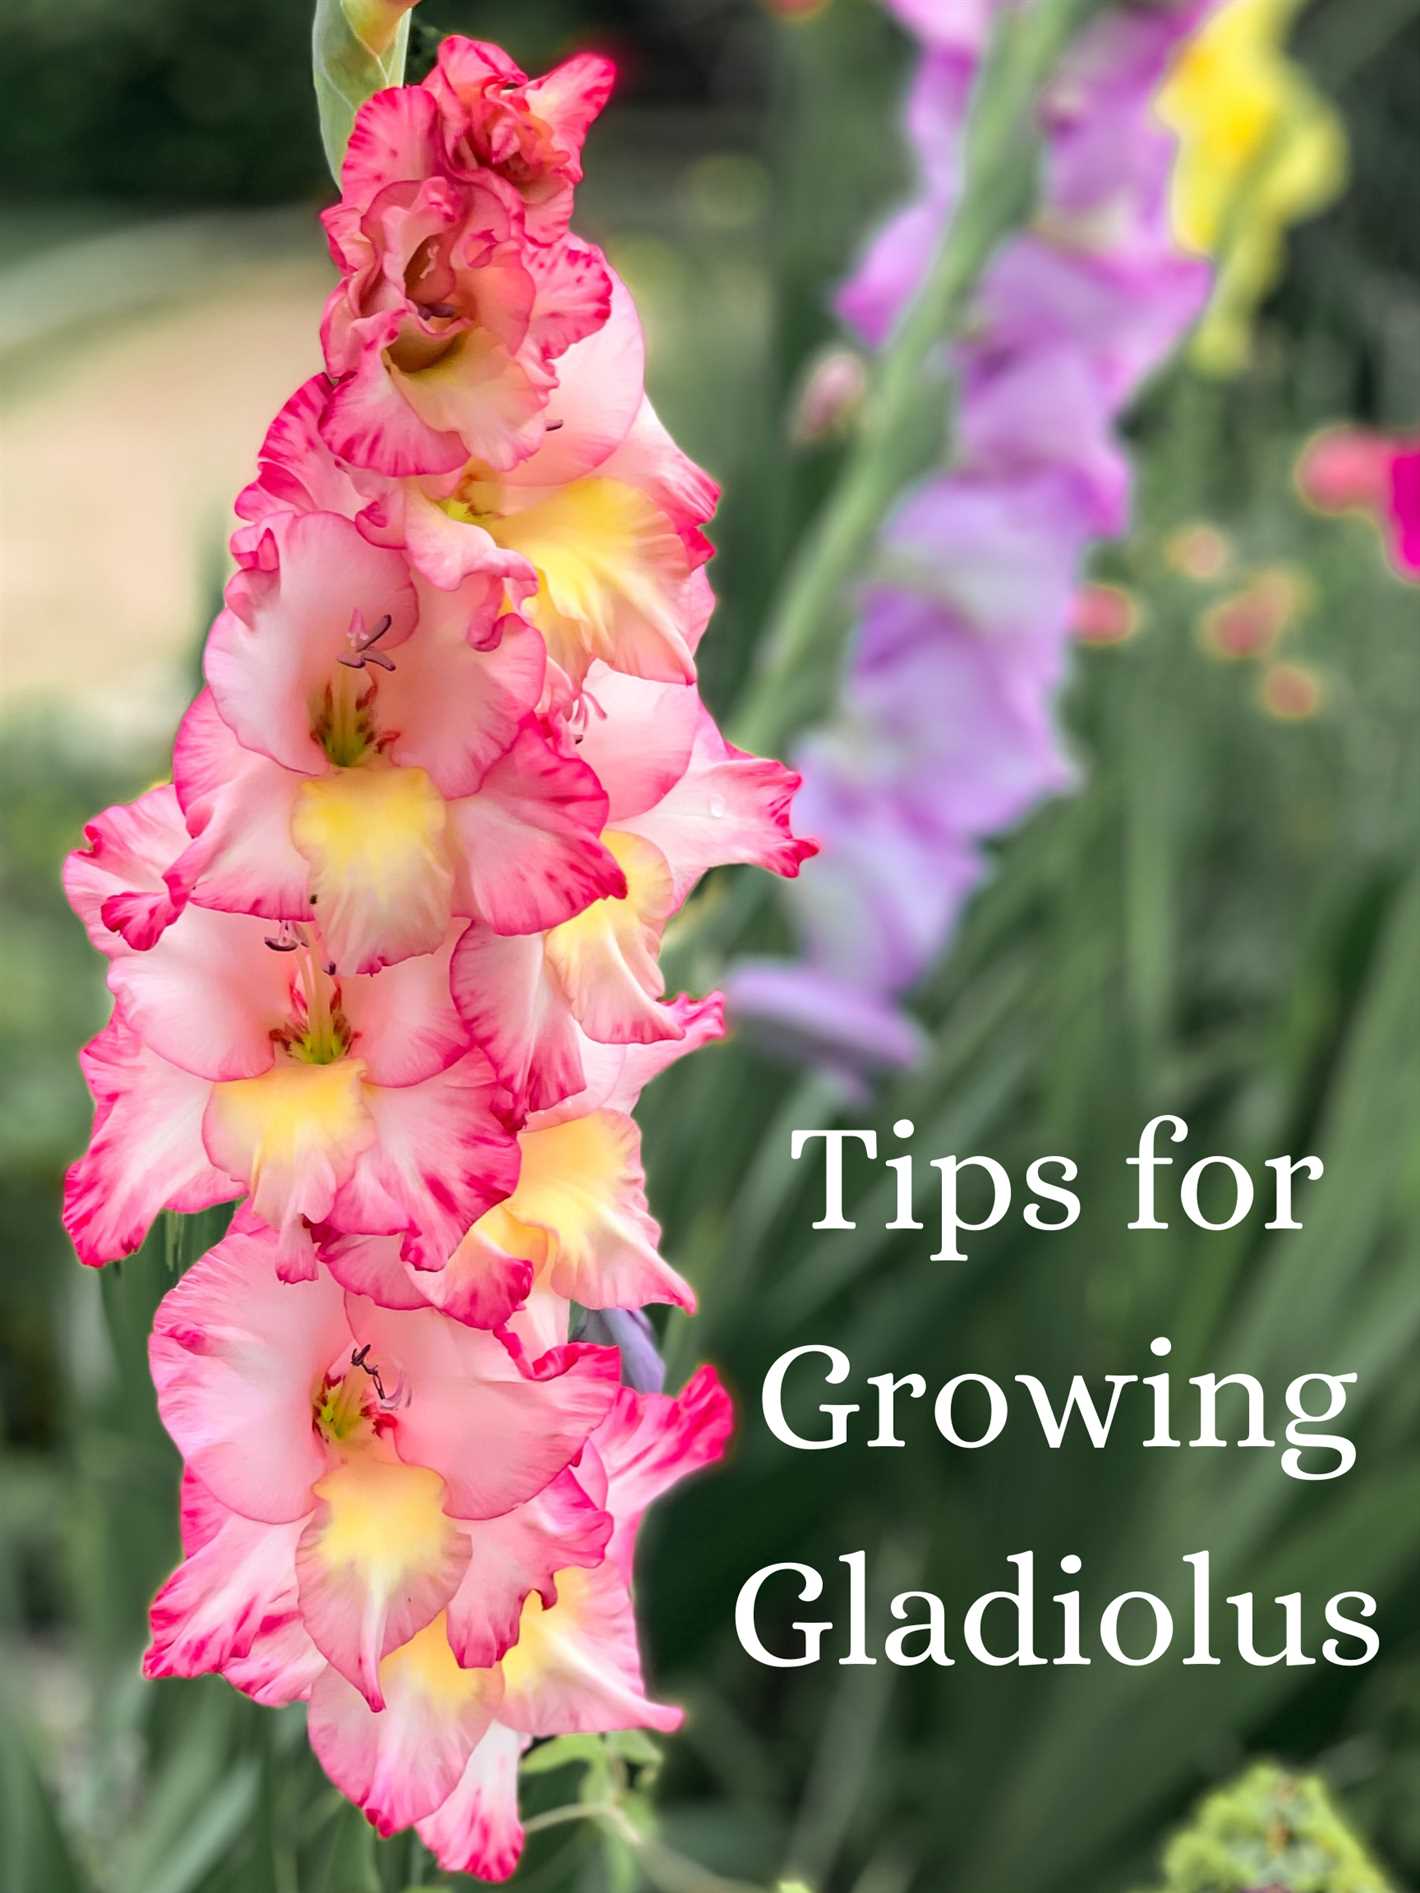 Choosing the Wrong Location for Planting Gladiolus